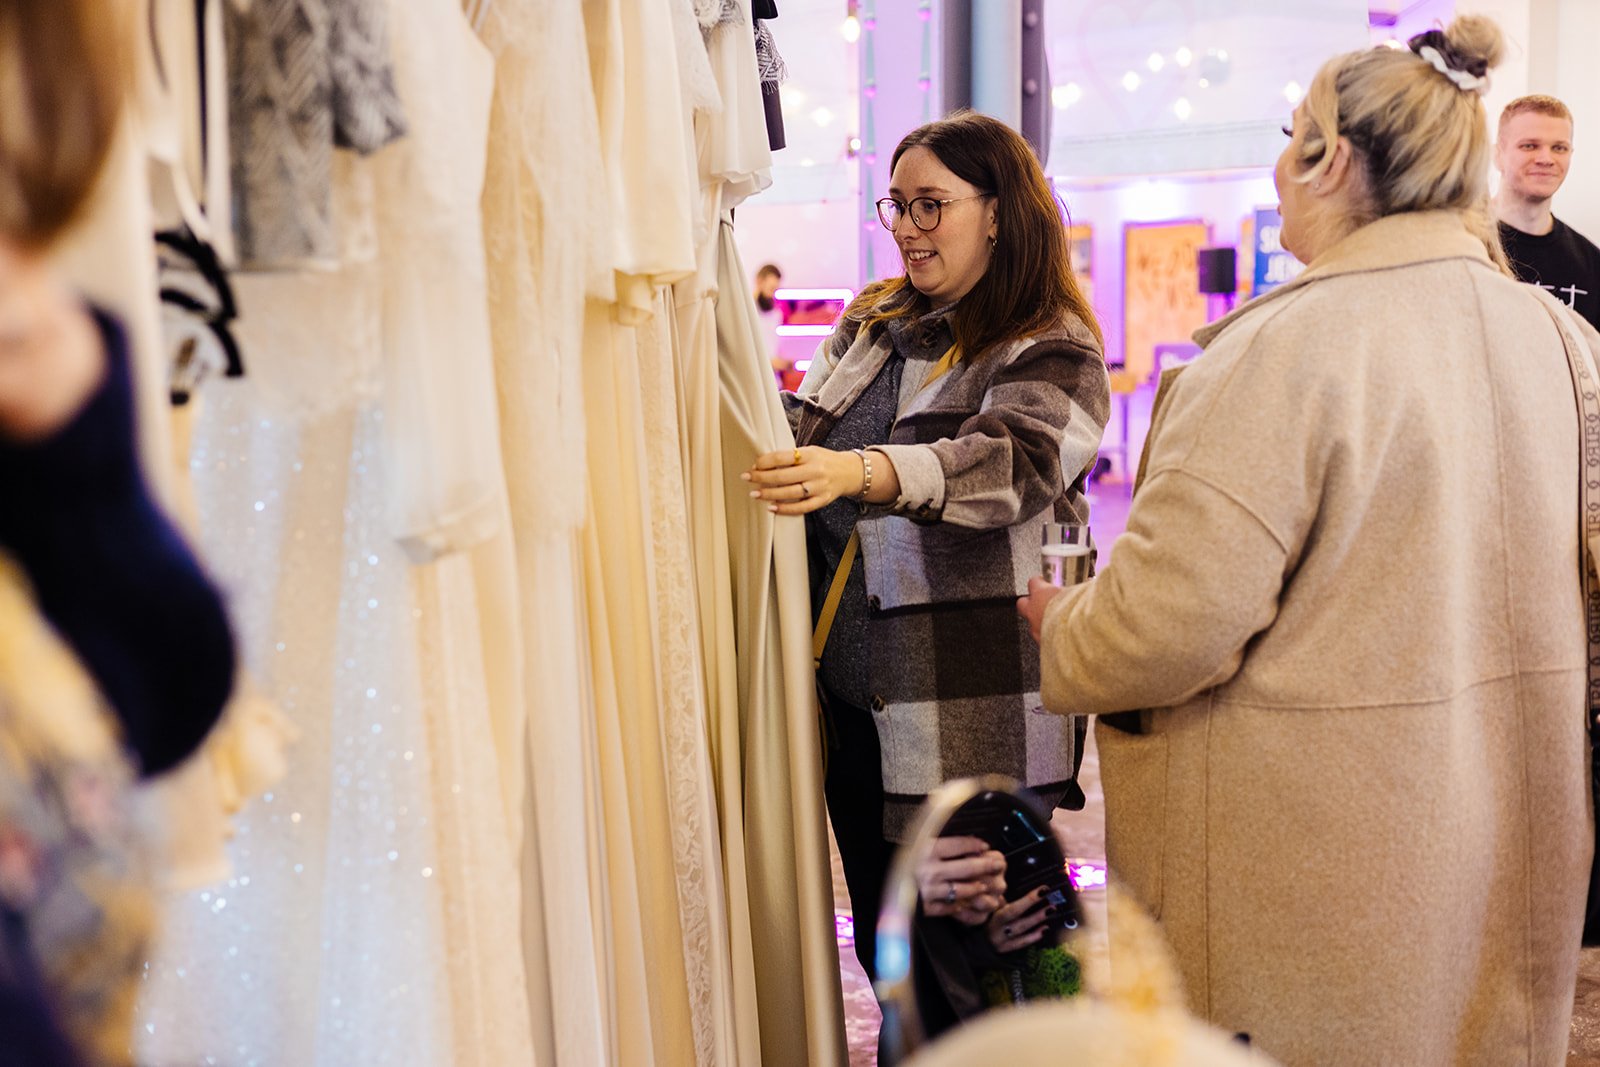  Attendees at a wedding fair browsing through rails of bridal gowns. 